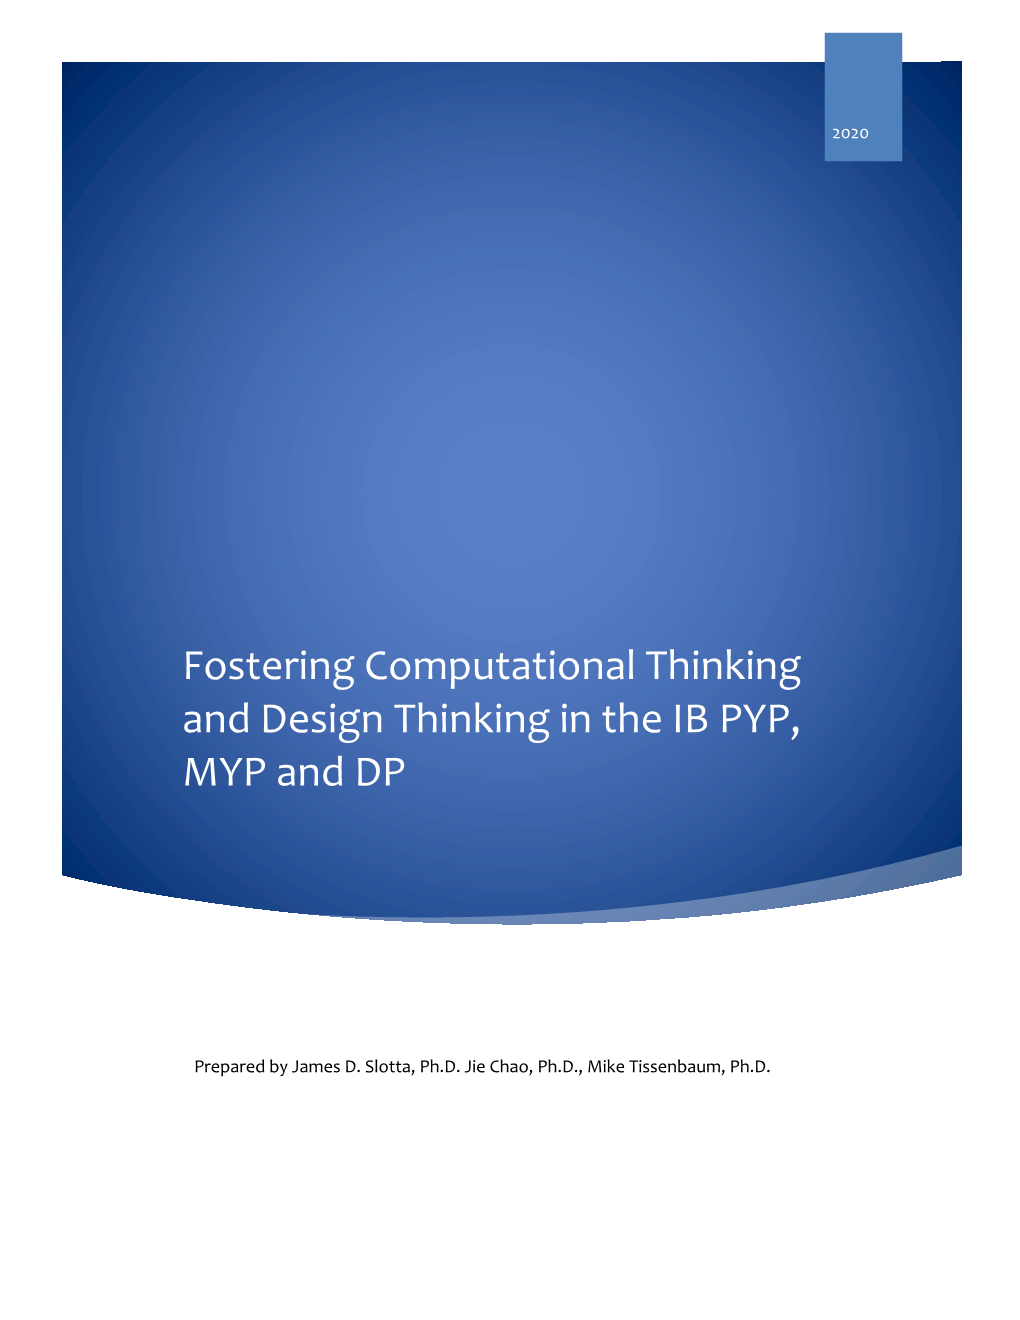 Fostering Computational Thinking and Design Thinking in the IB PYP, MYP and DP